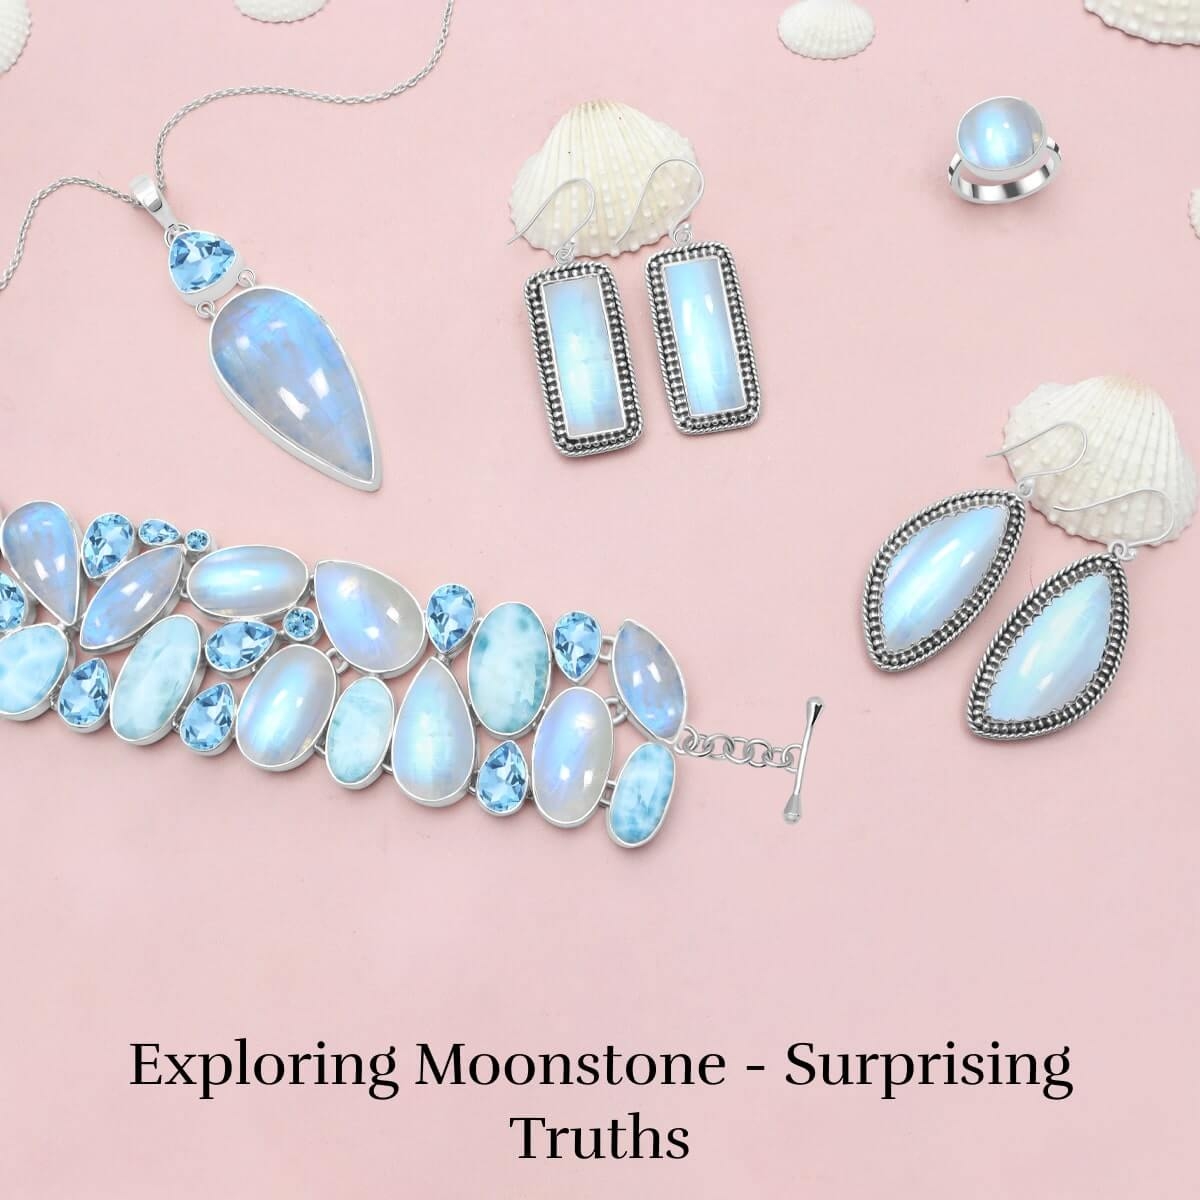 Facts About Moonstone